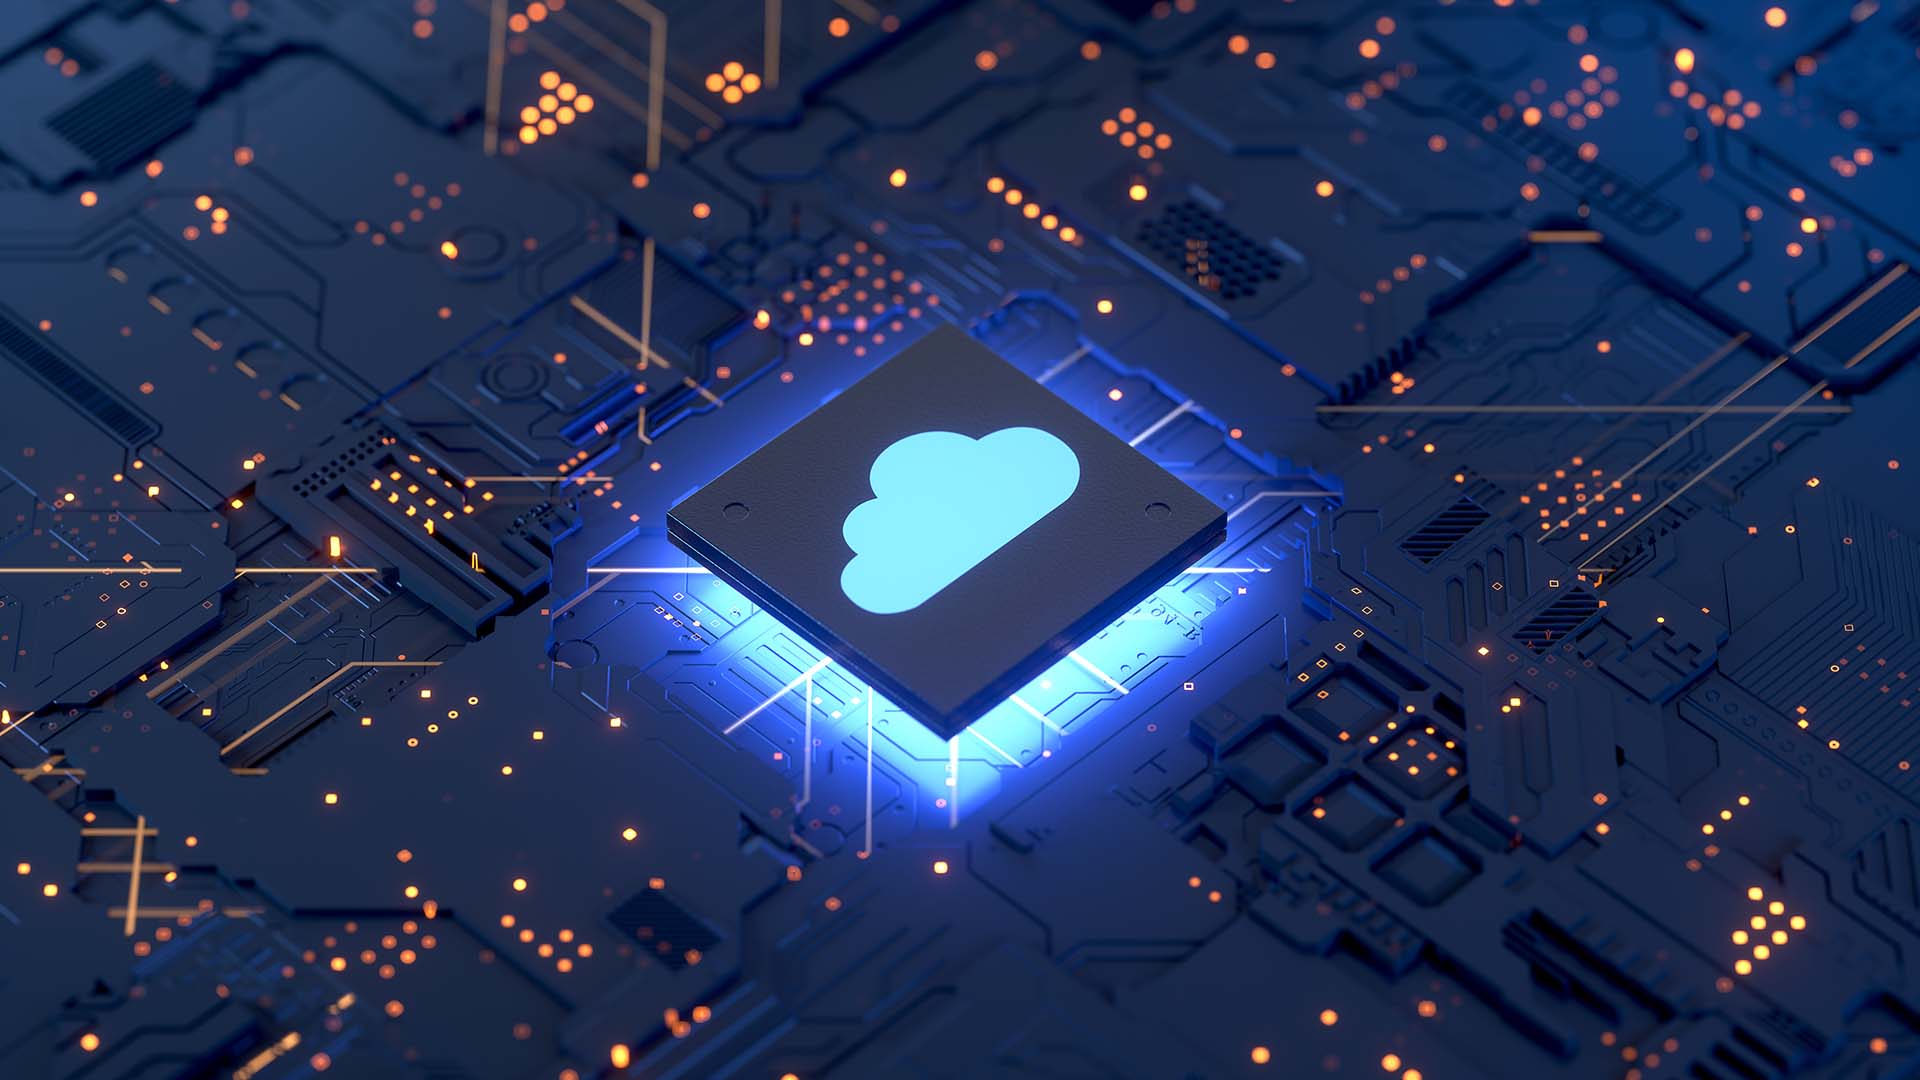 ATC services for cloud computing companies